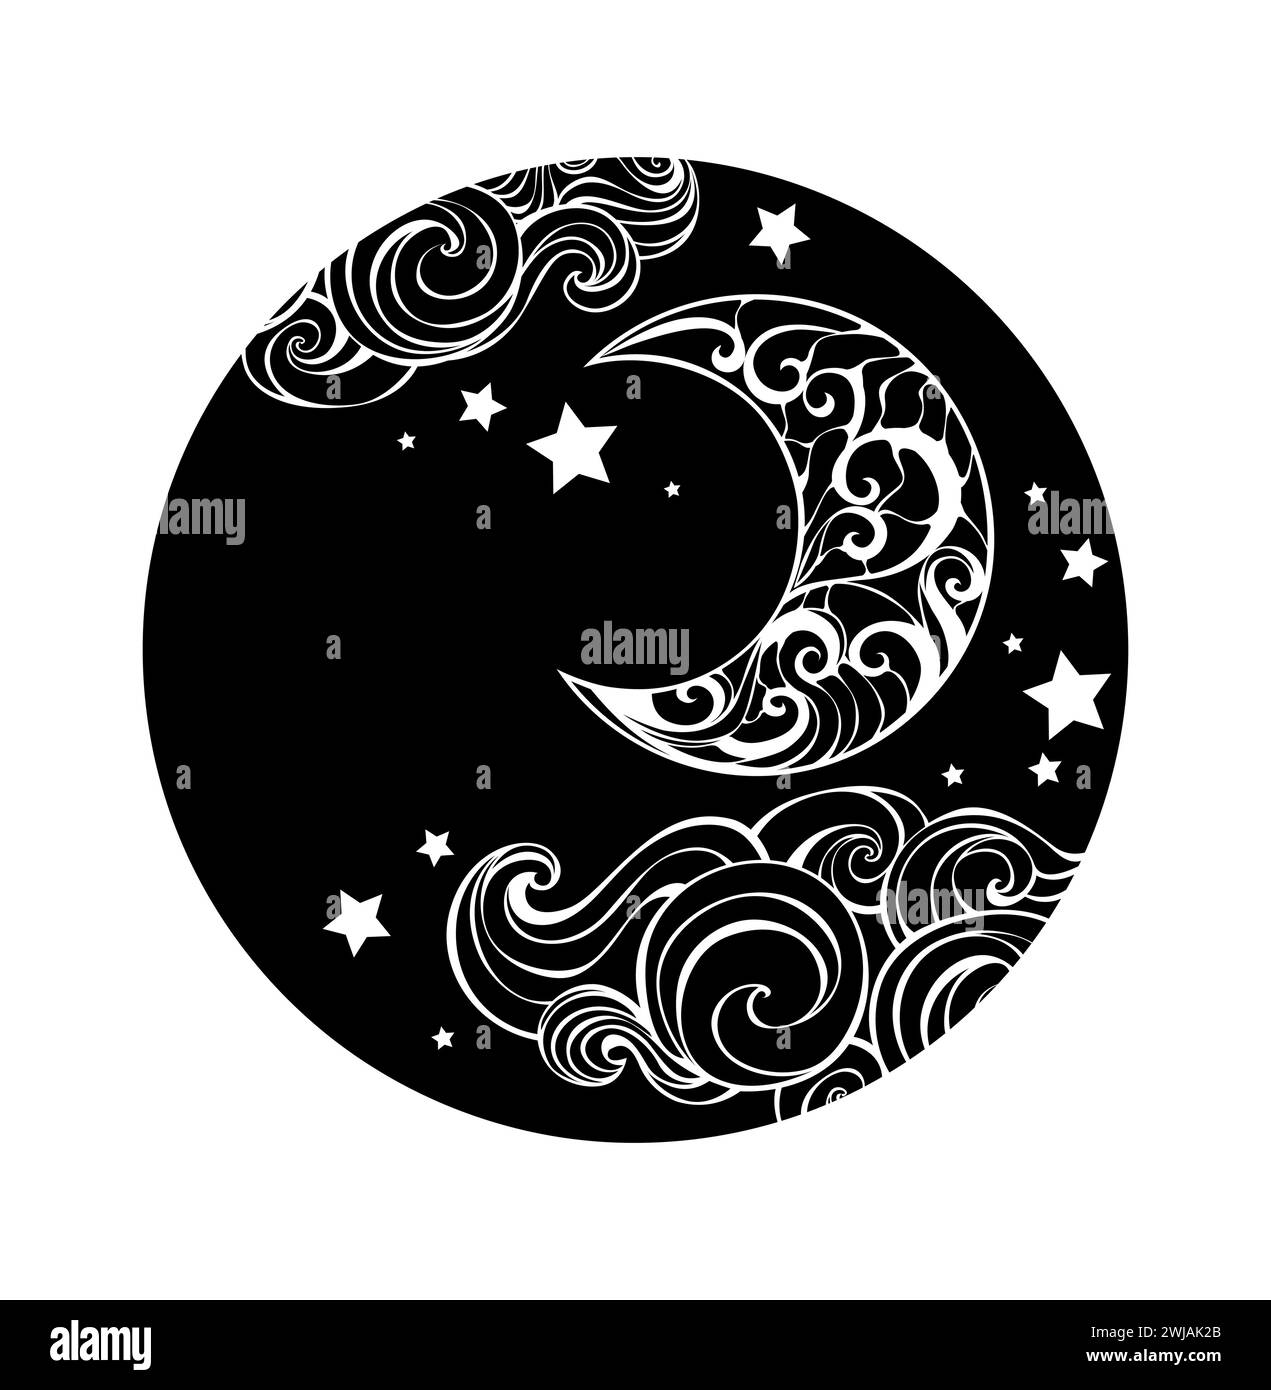 Round, silhouette, monogram with an artistically drawn crescent, clouds and stars on white background. Patterned crescent. Stock Vector